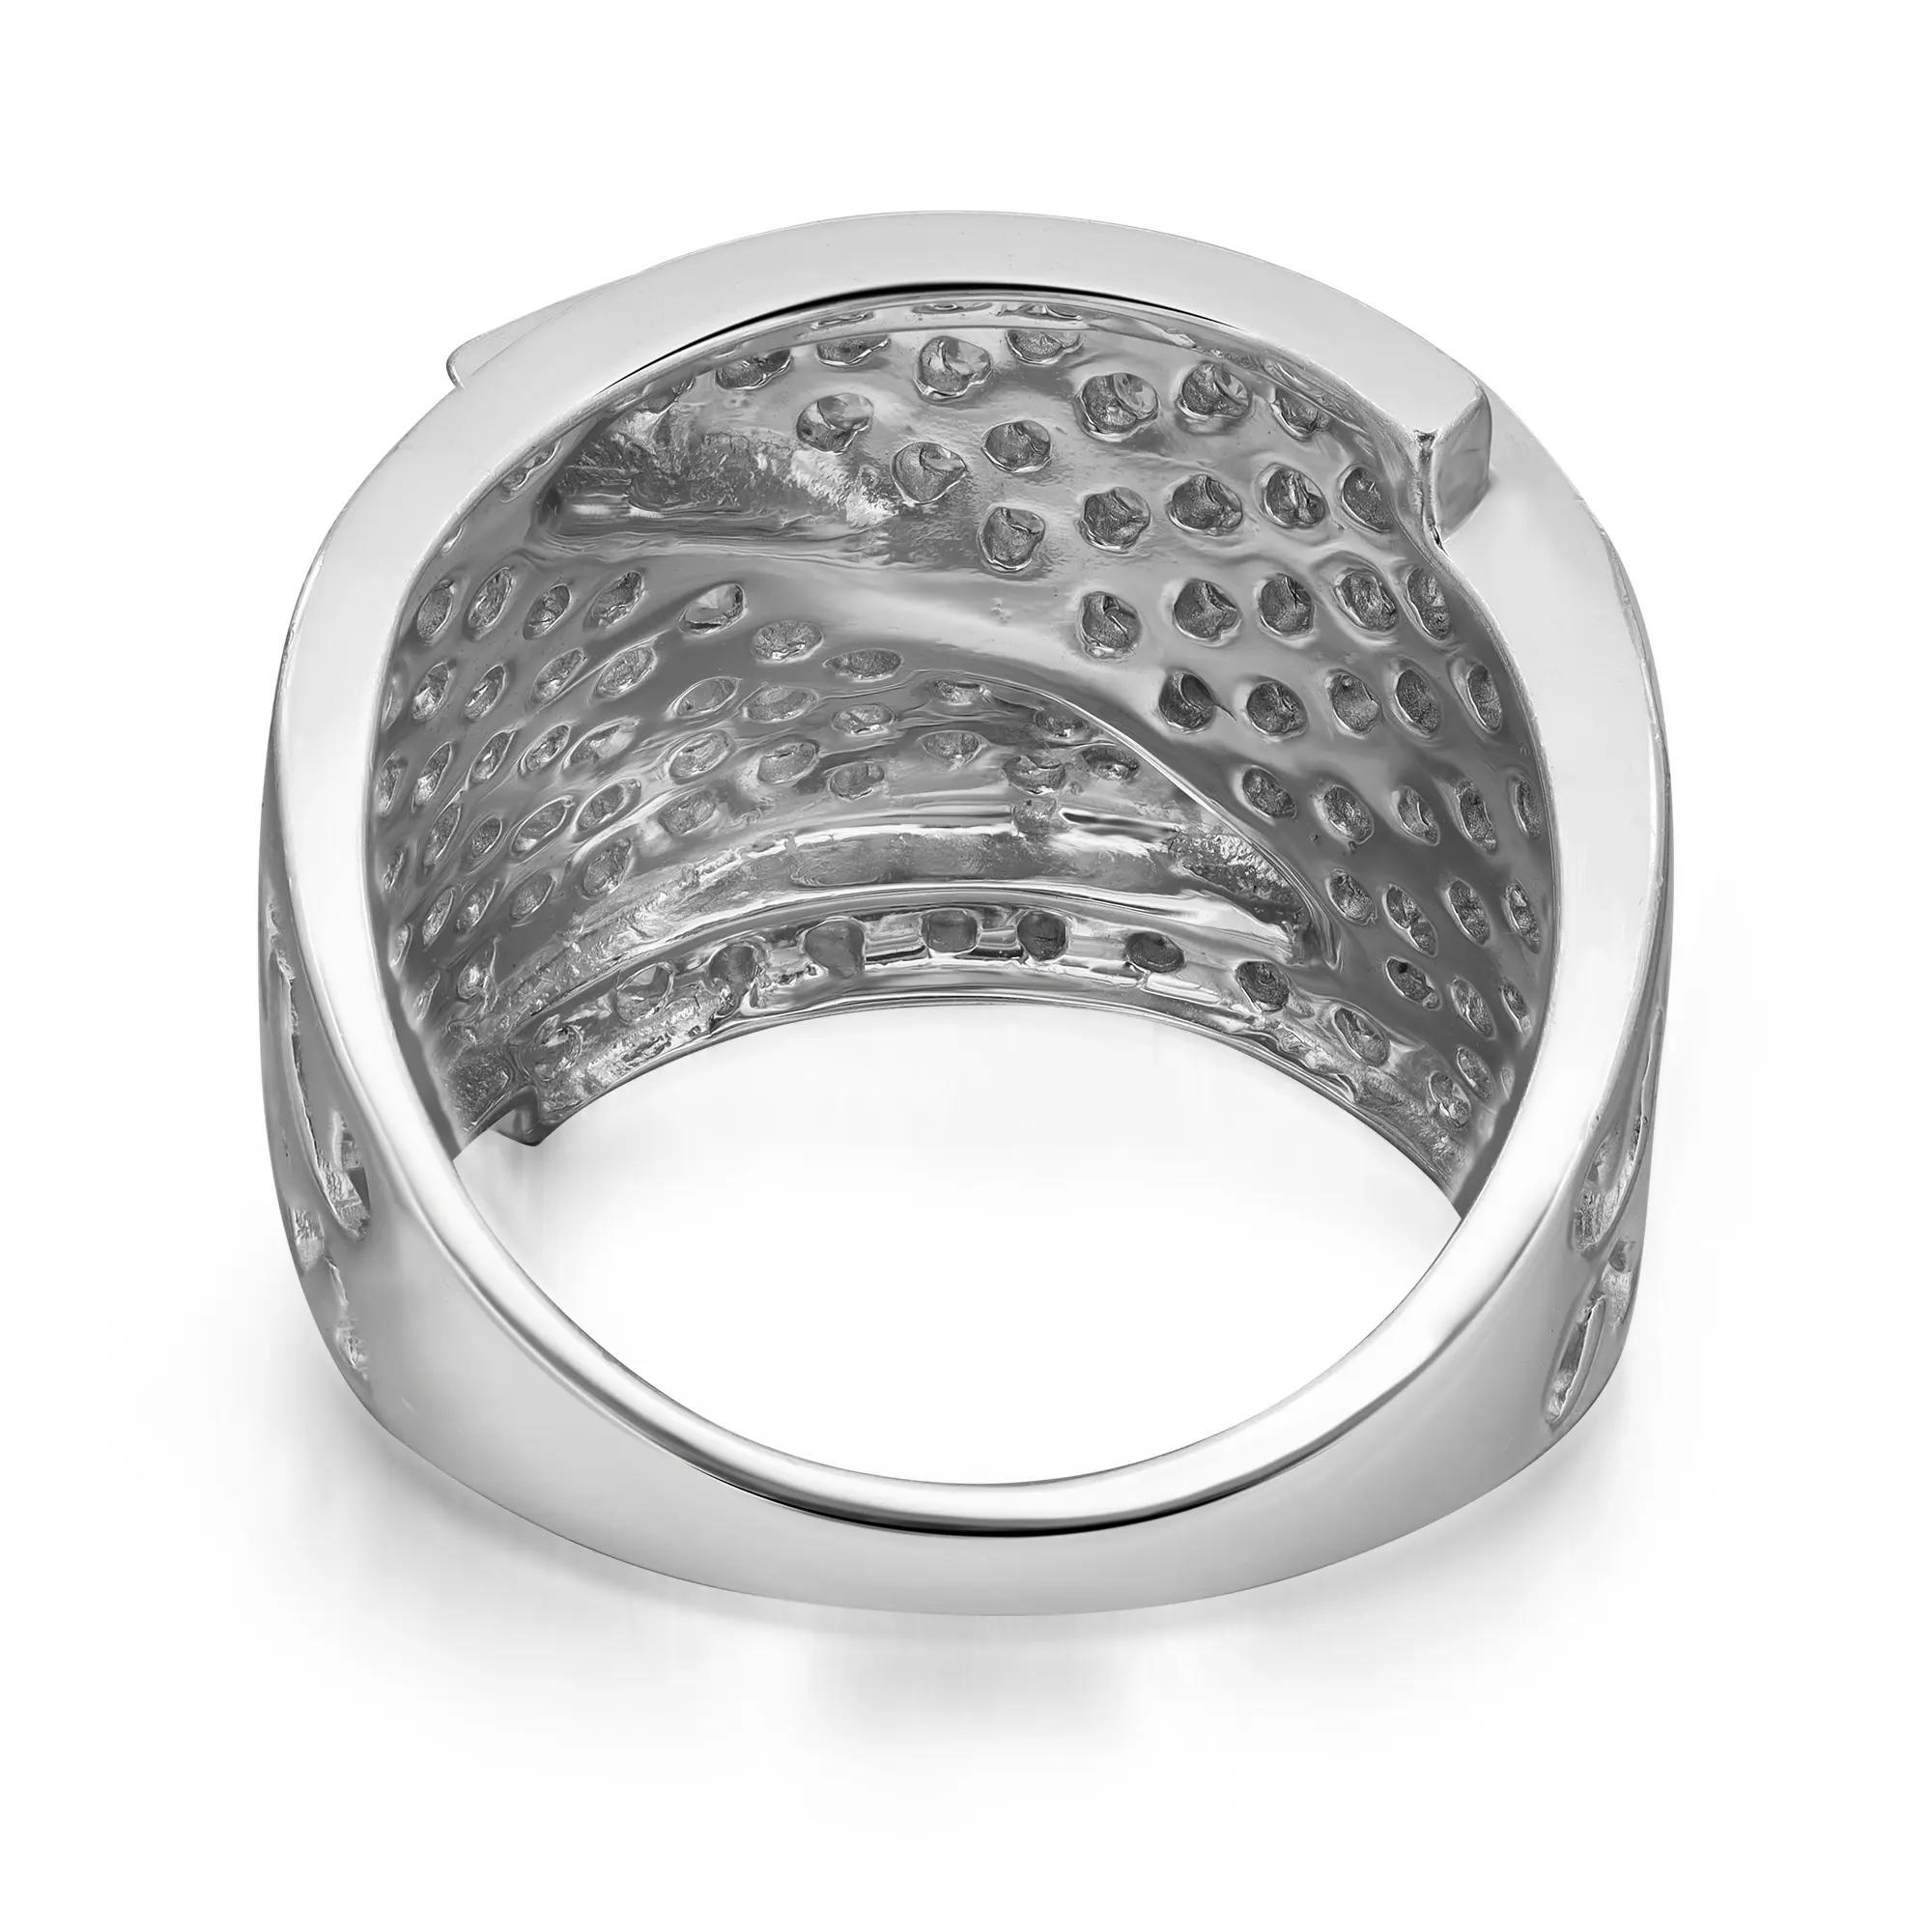 Modern 2.39Cttw Pave Set Round Cut Diamond Wide Band Ring 14K White Gold Size 7.75 For Sale